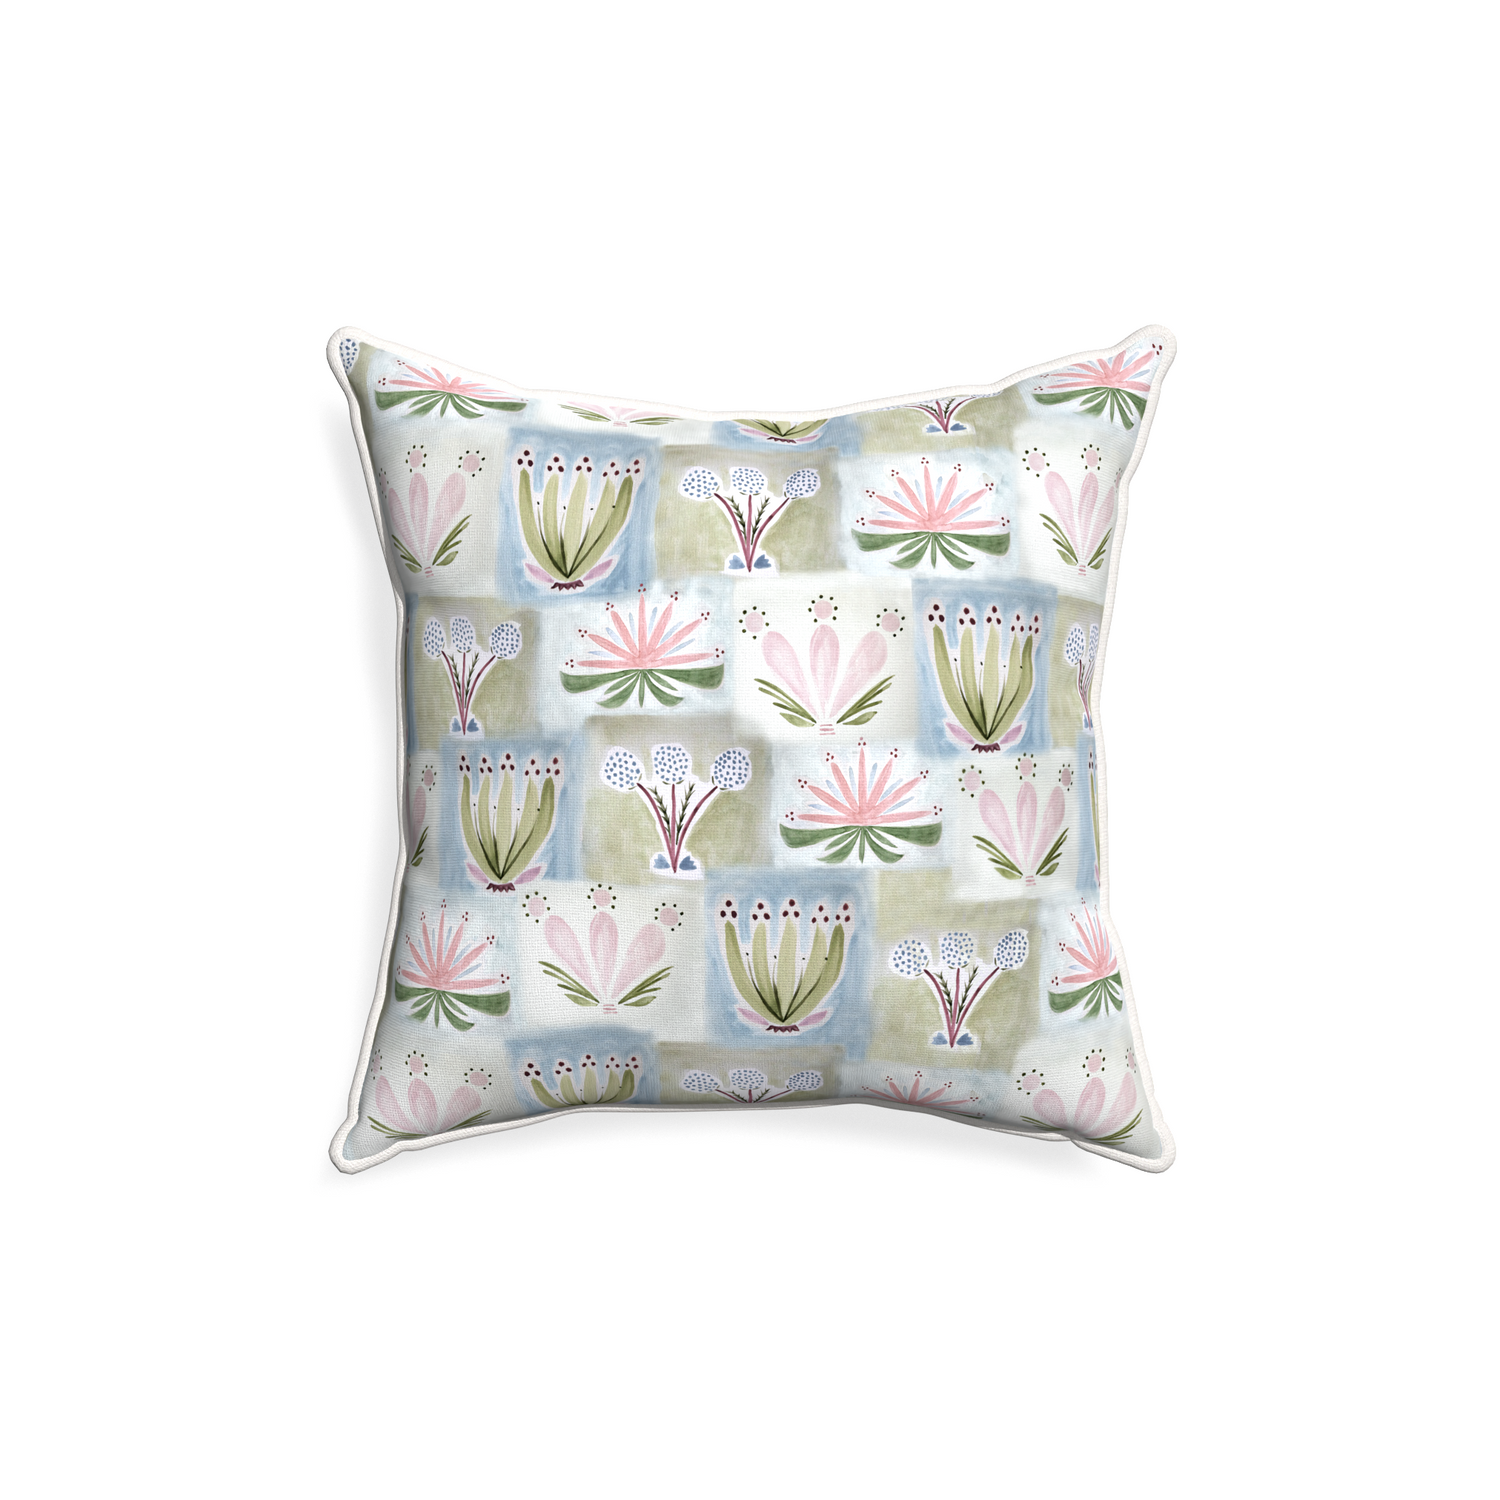 18-square harper custom hand-painted floralpillow with snow piping on white background